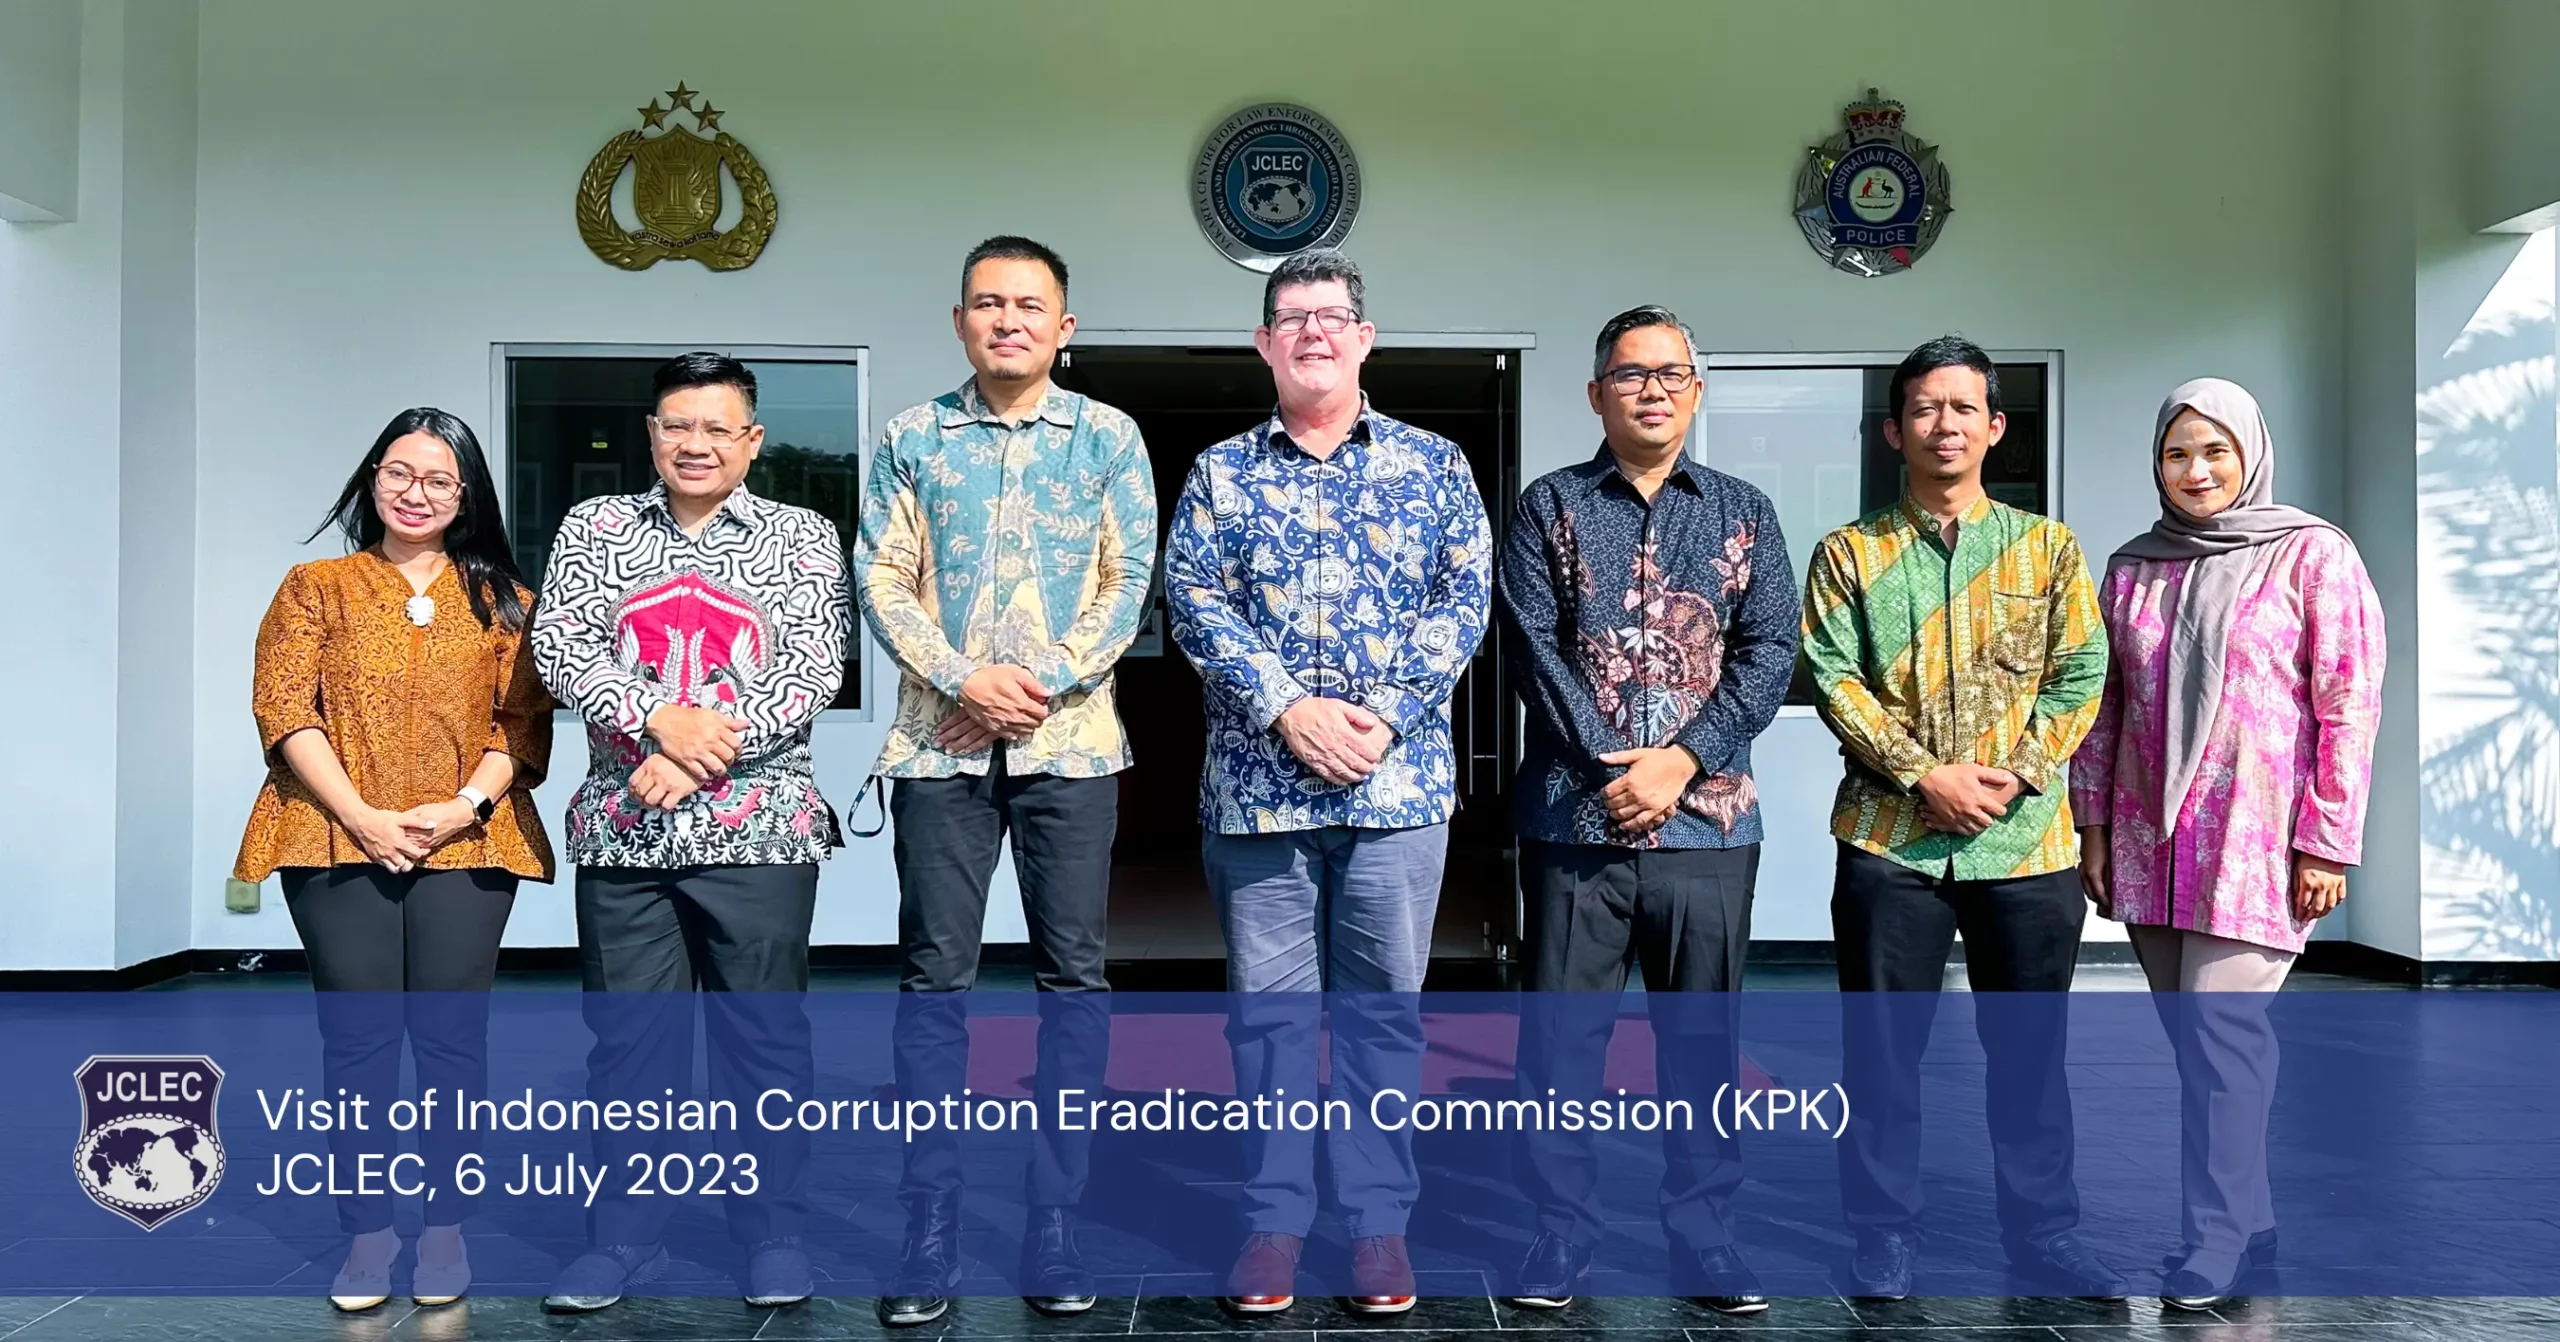 Official Photograph of the Delegation of Indonesian Corruption Eradication Commission (KPK) with JCLEC Management